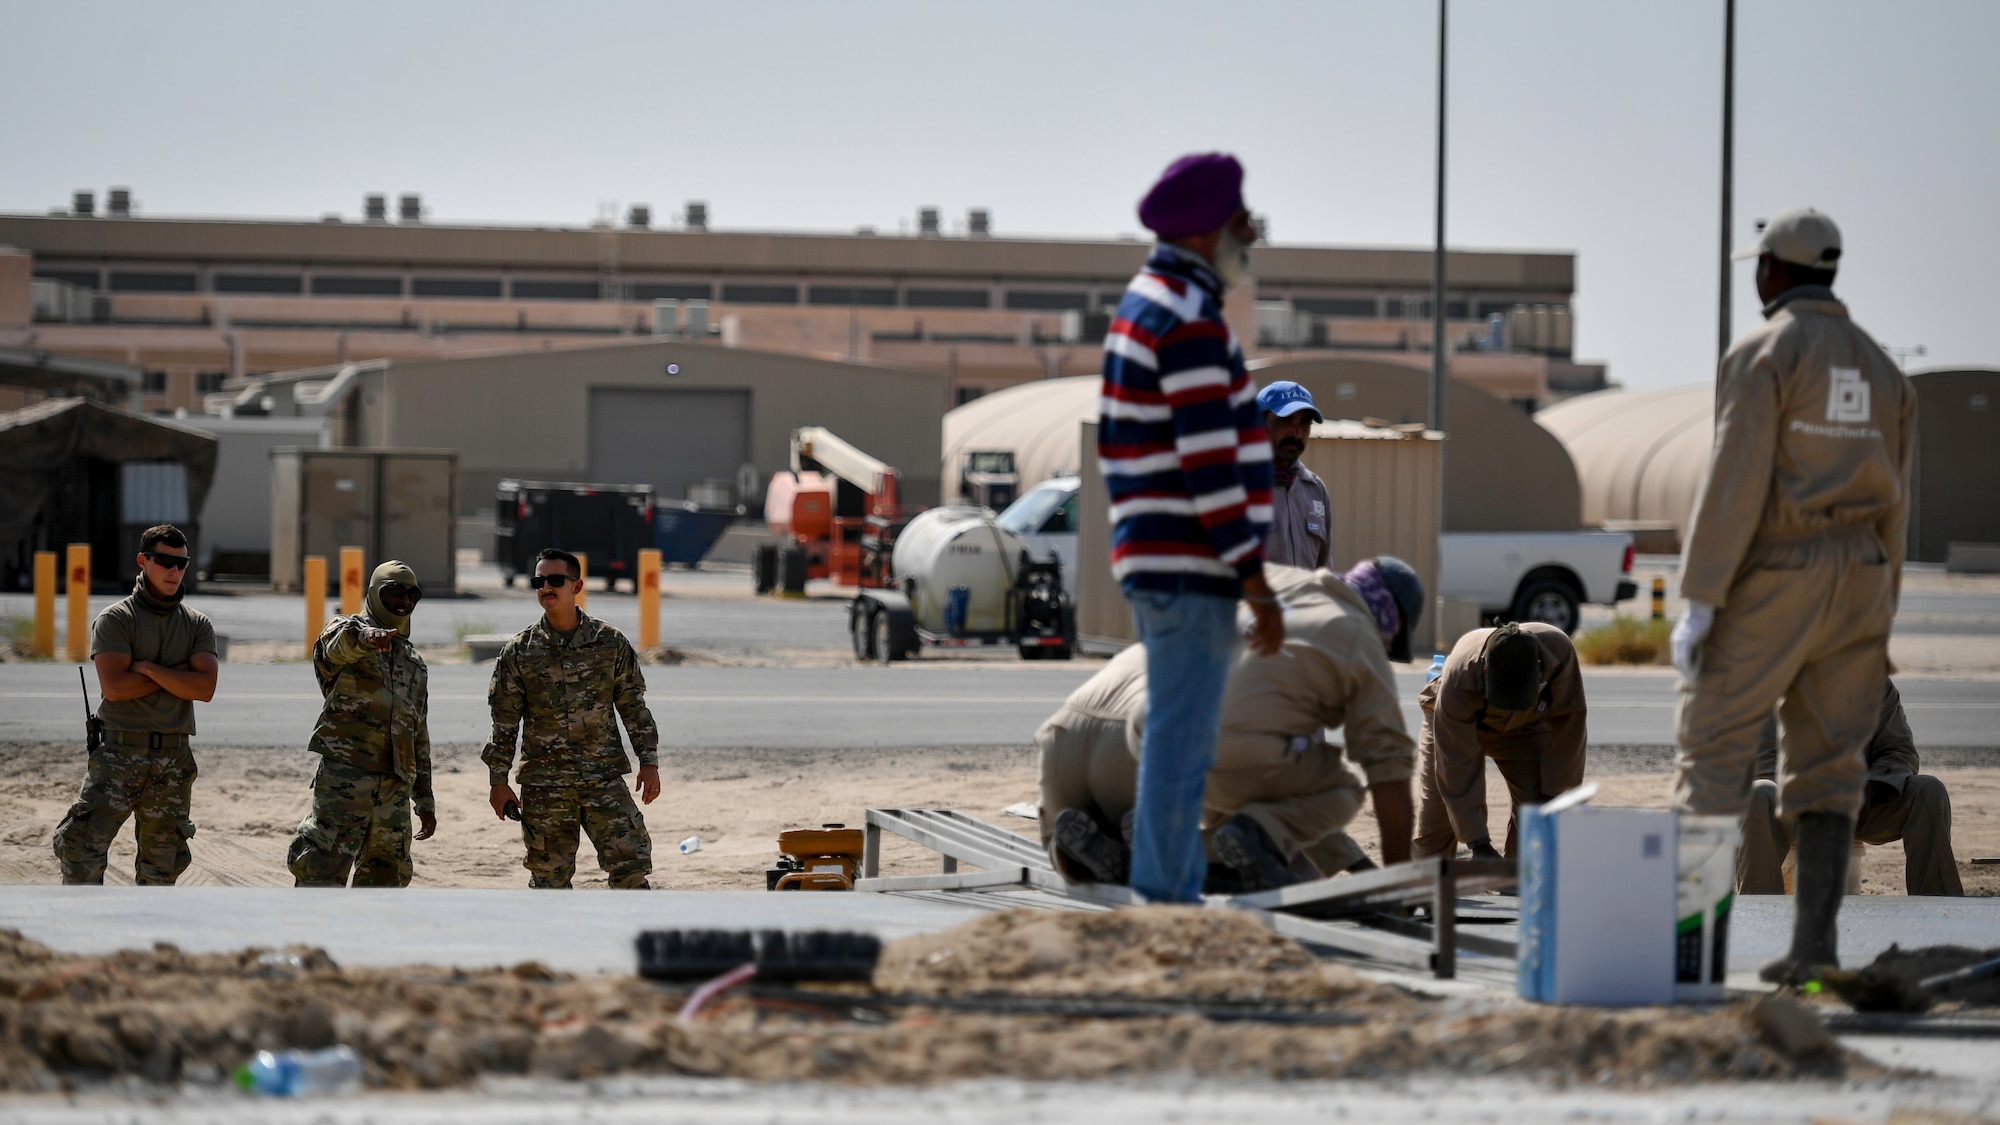 Airmen assigned to the 386th Expeditionary Civil Engineer Squadron observe contractors building an addition to the flightline at Ali Al Salem, Kuwait, Sept. 4, 2019. The force protection flight provides a security buffer between other country nationals such as contractors, their employees and the general base population. Airmen assist and escort OCNs during their duty day, help minimize potential data collection, and ensure the departure of vehicles and personnel once their services are completed for the day. (U.S. Air Force photo by Staff Sgt. Mozer O. Da Cunha)